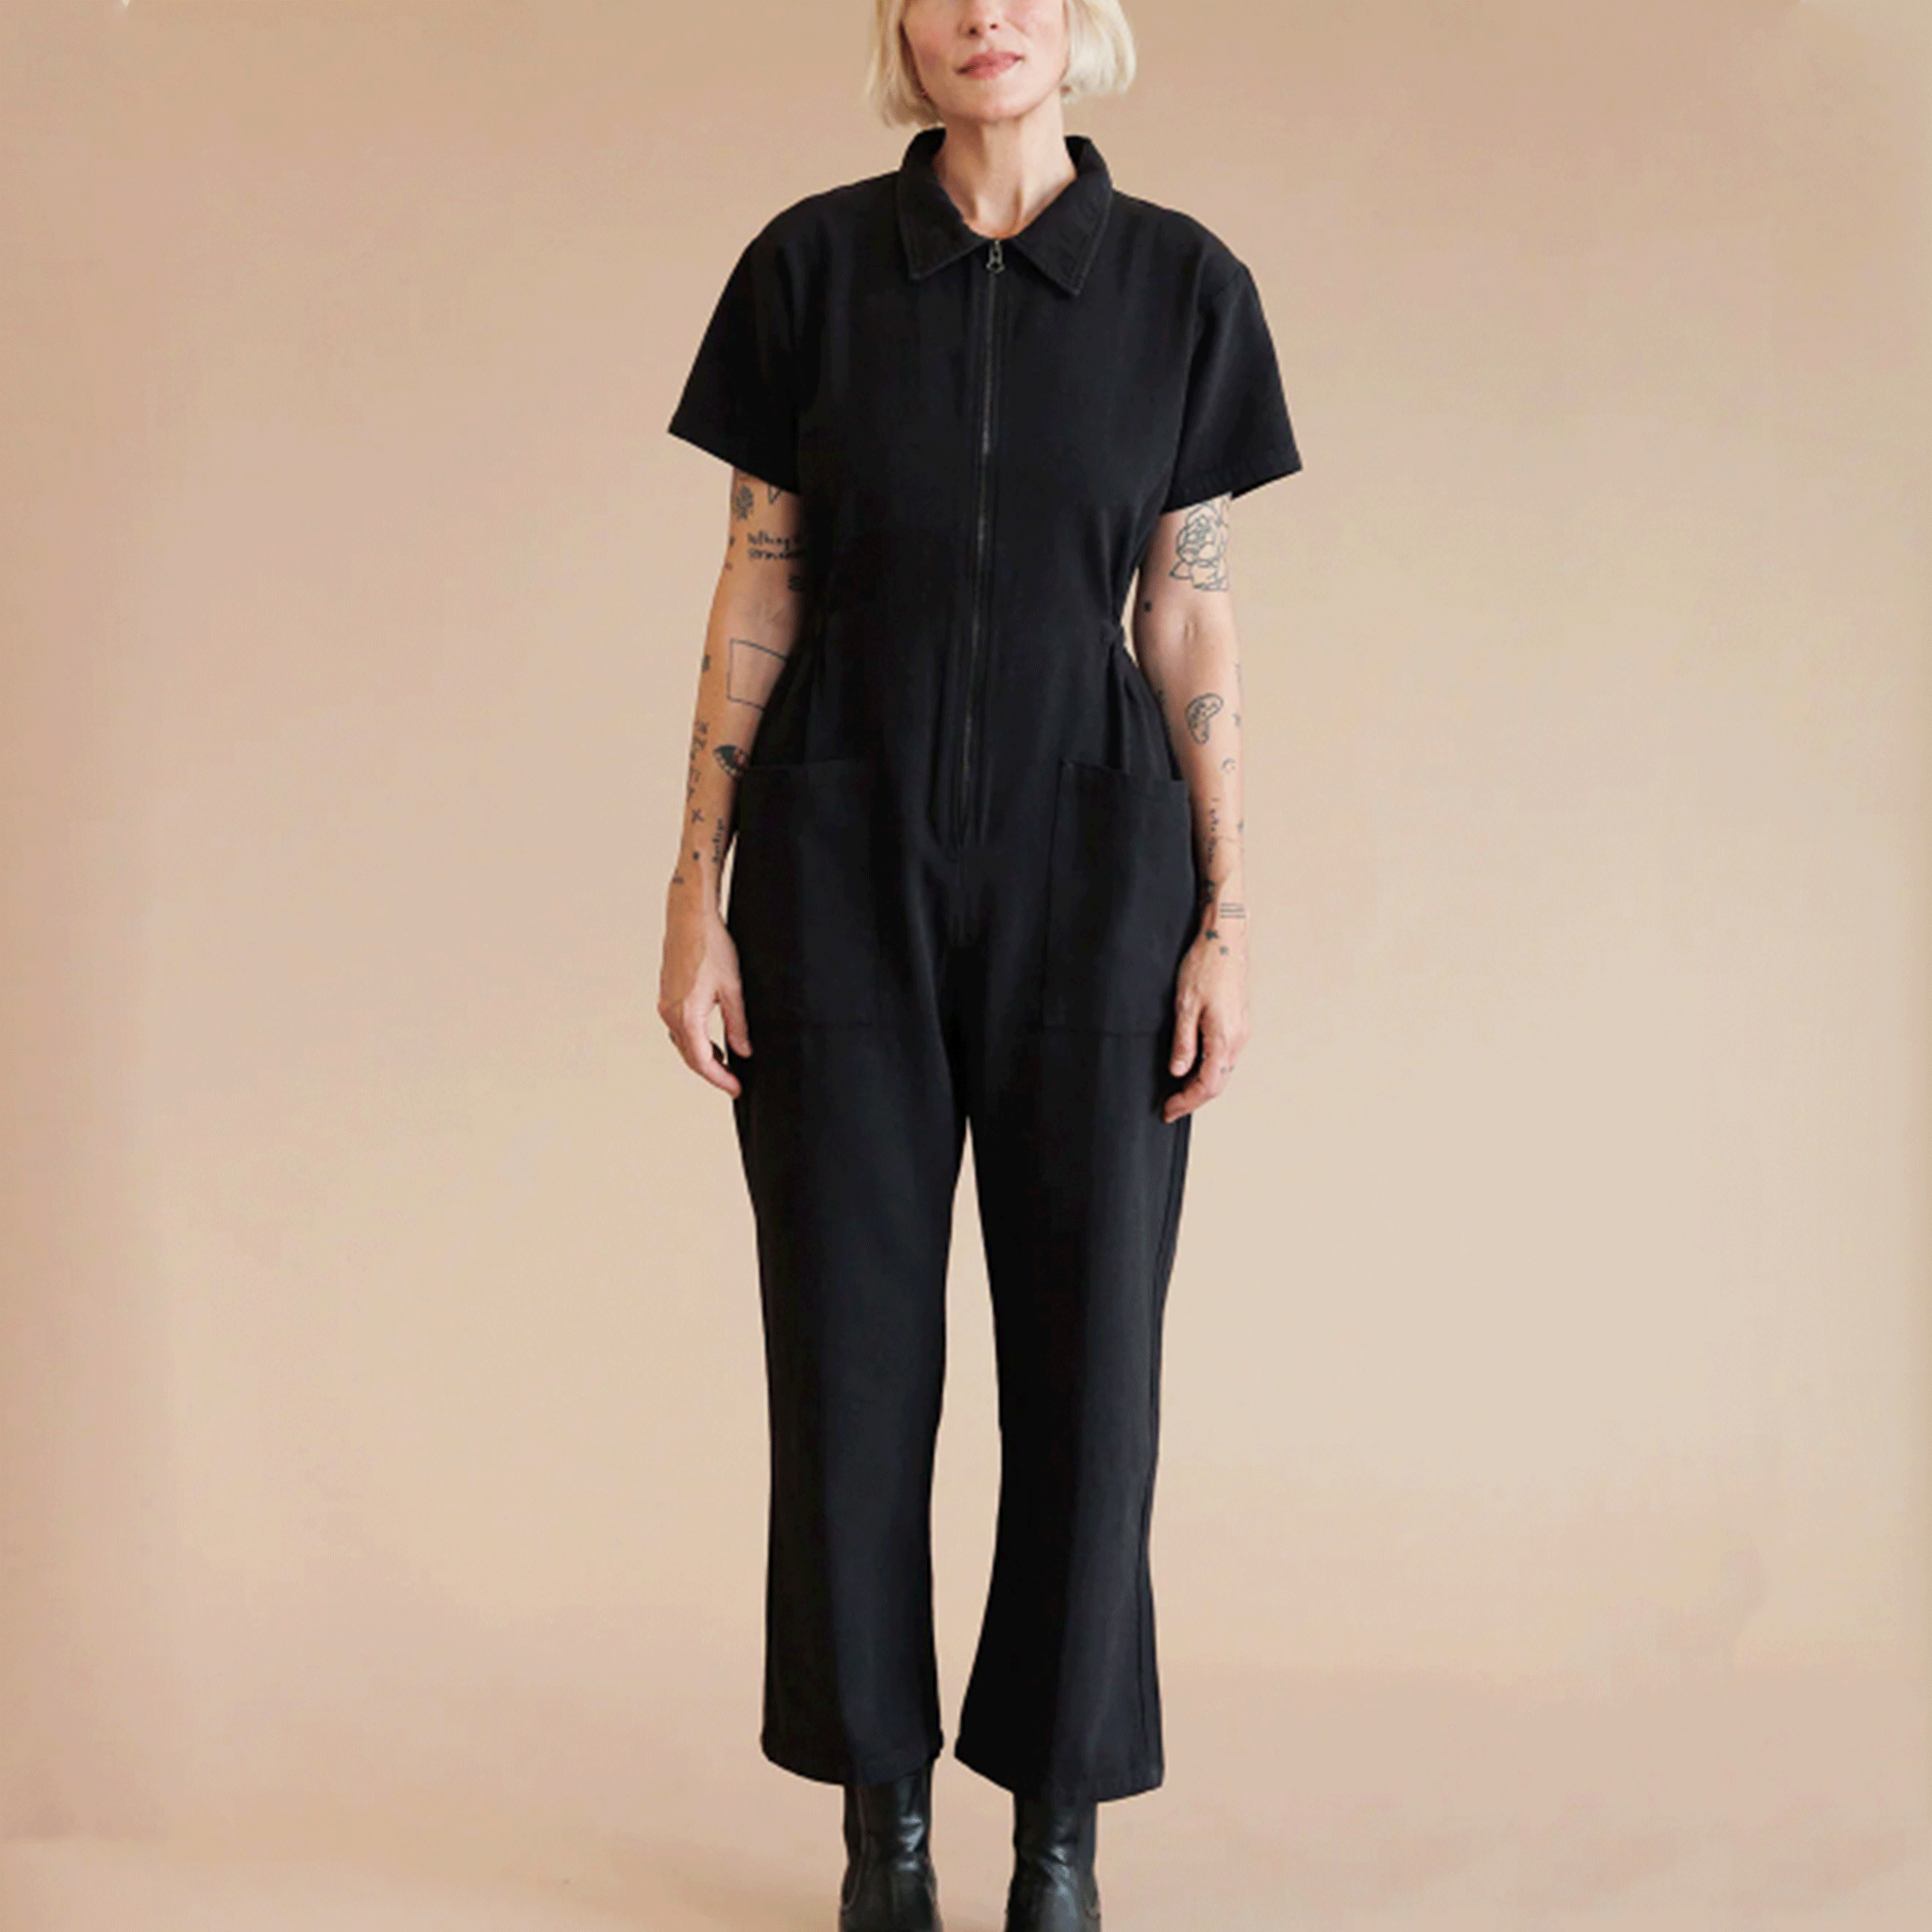 A model wearing a black short sleeve utility jumpsuit with a front zipper detail.